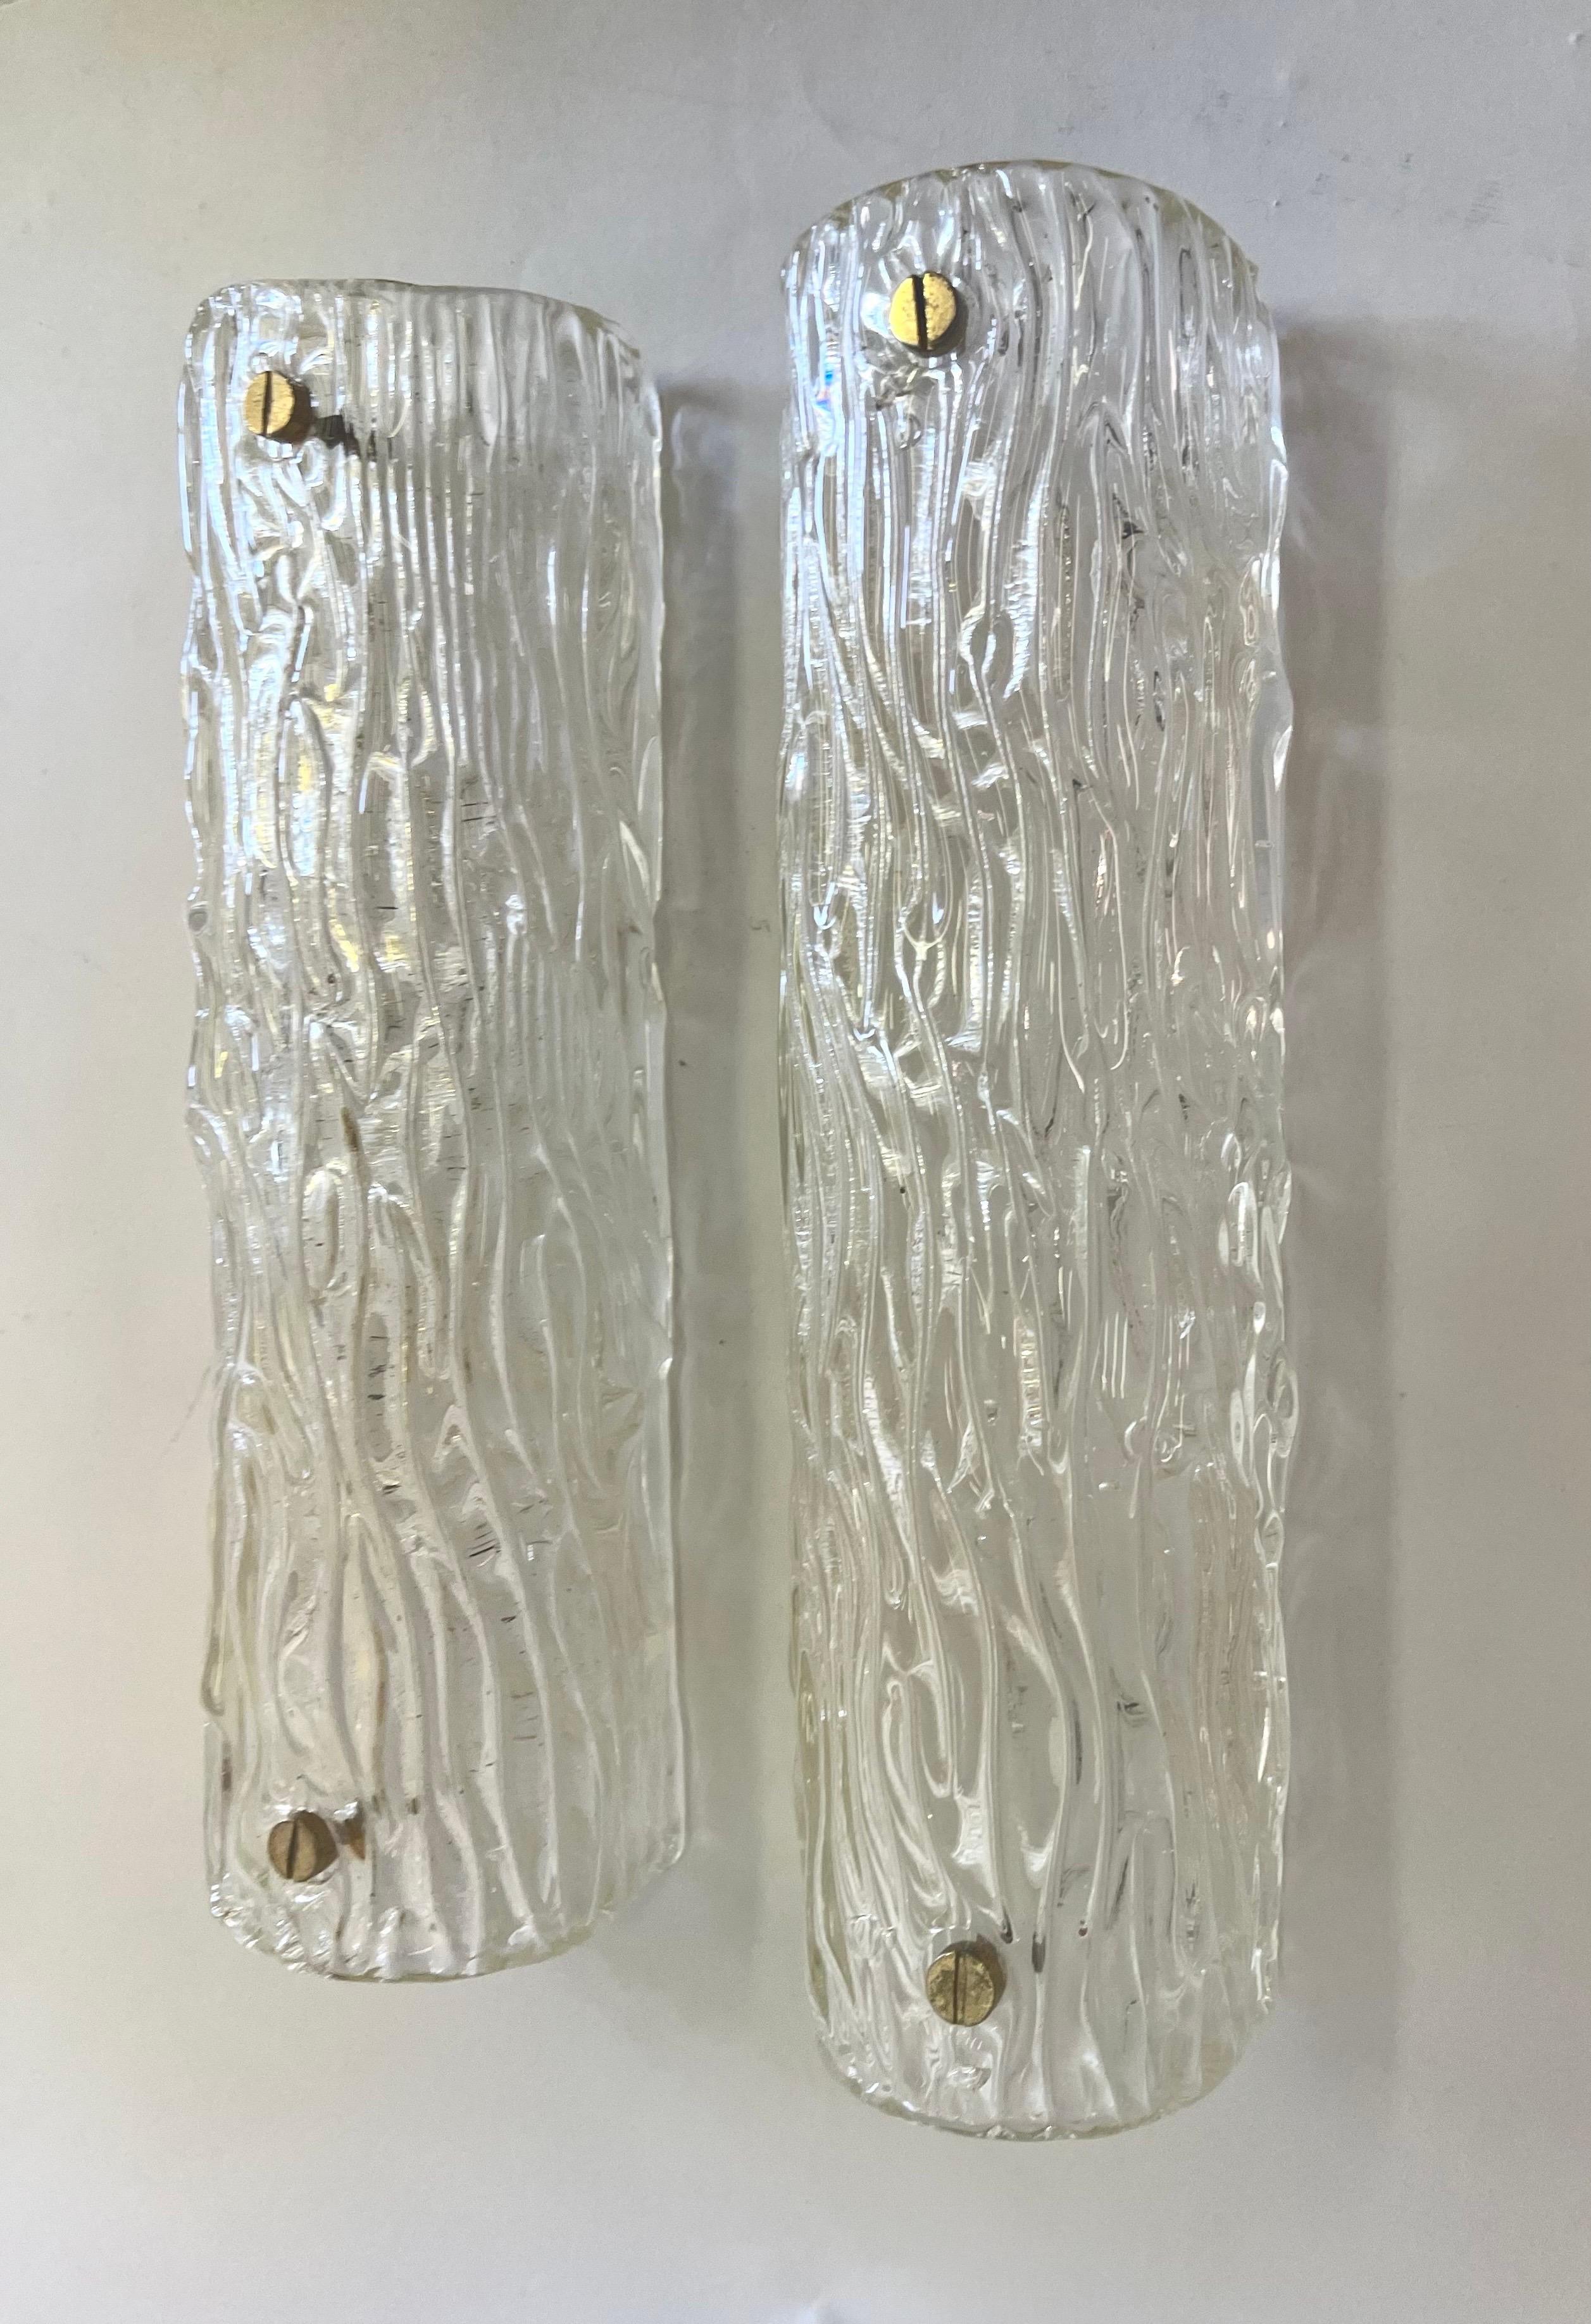 A Pair of Large, Italian Mid-Century Modern Murano / Venetian glass wall lights or sconces in a thick, opaque clear glass; and composed in an abstracted tree bark pattern, known as 